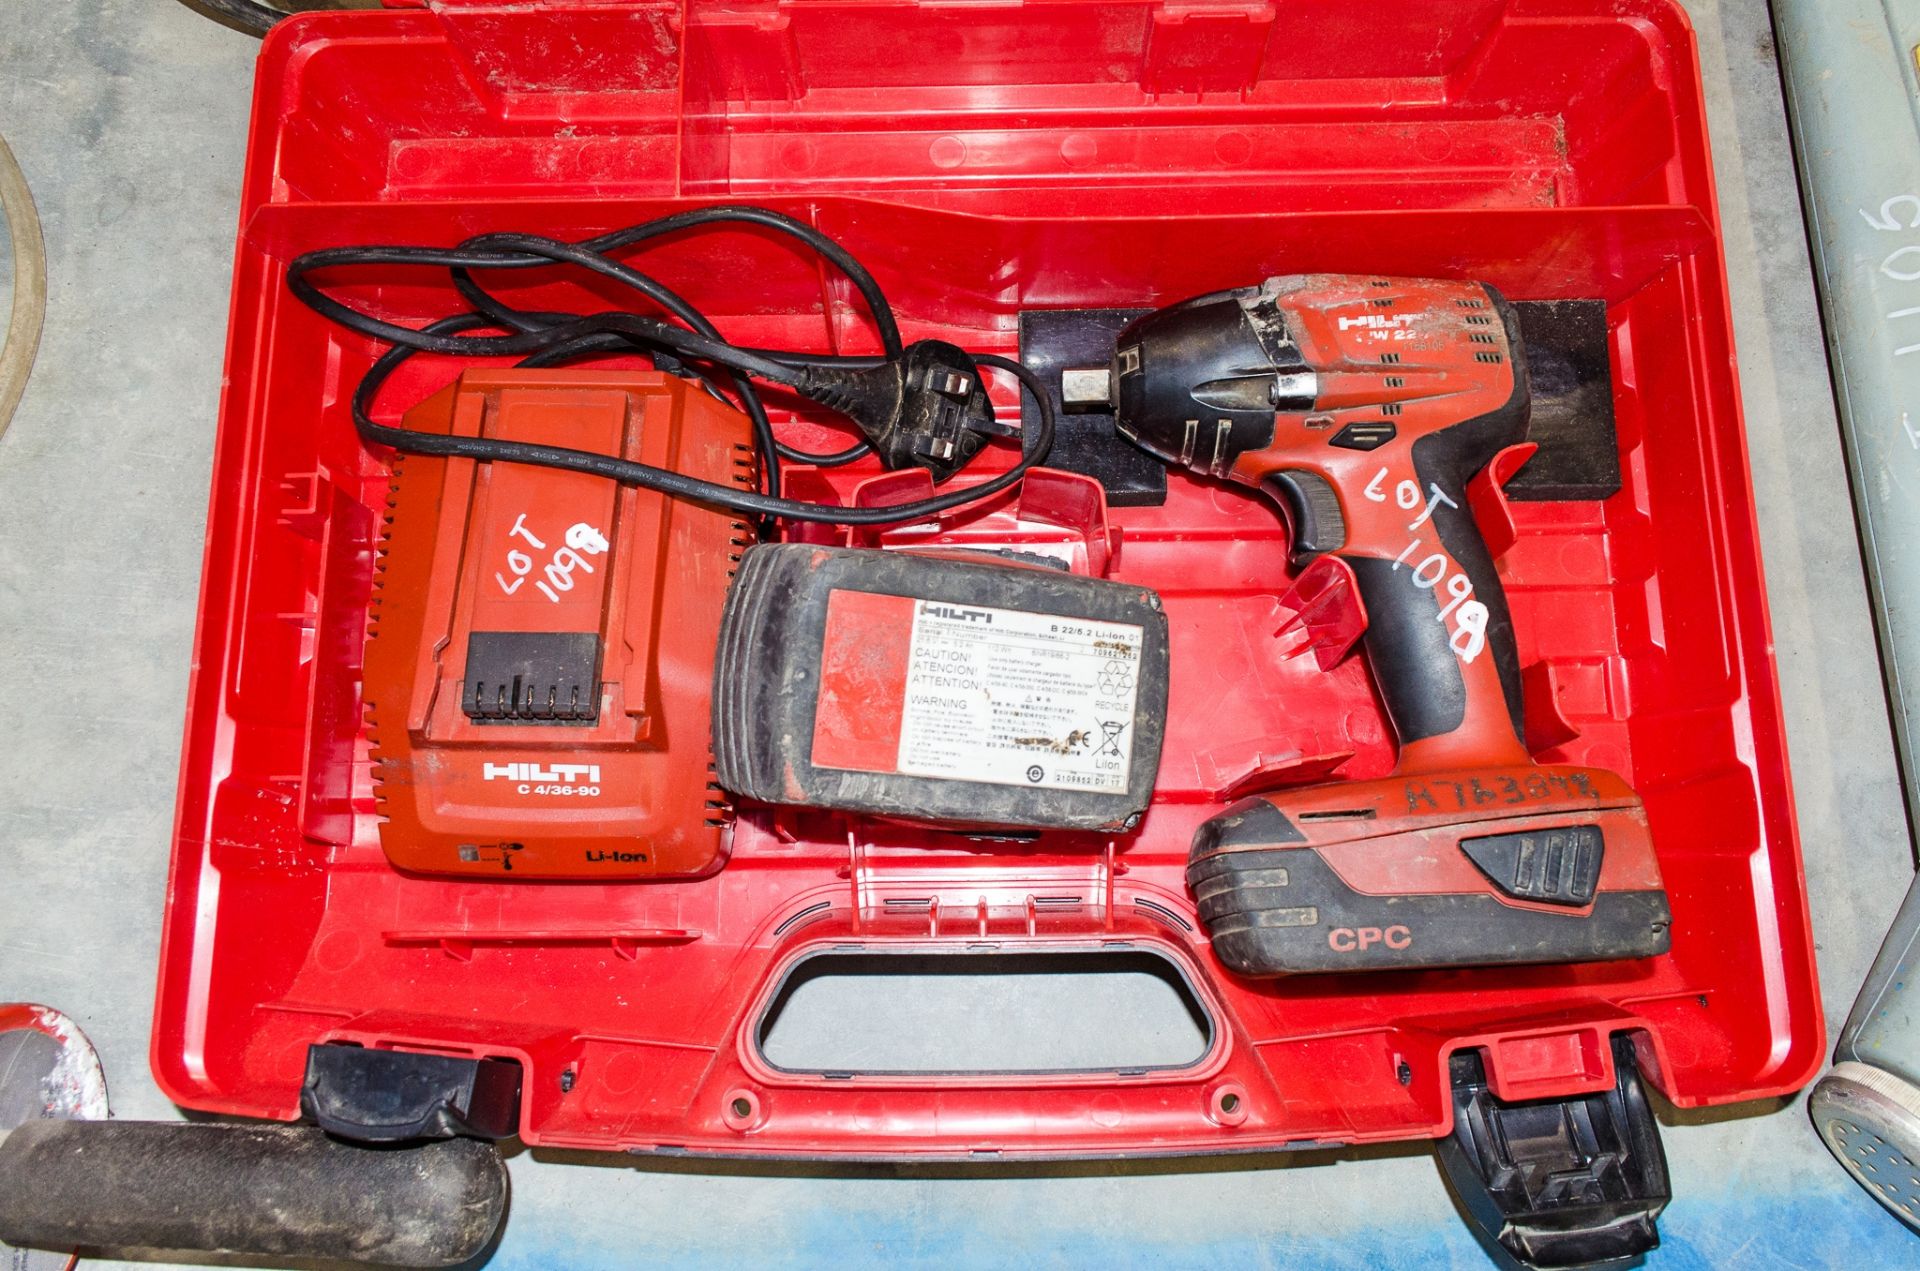 Hilti SIW 22-A OI cordless rotary hammer drill c/w 2 batteries, charger and carry case A762886